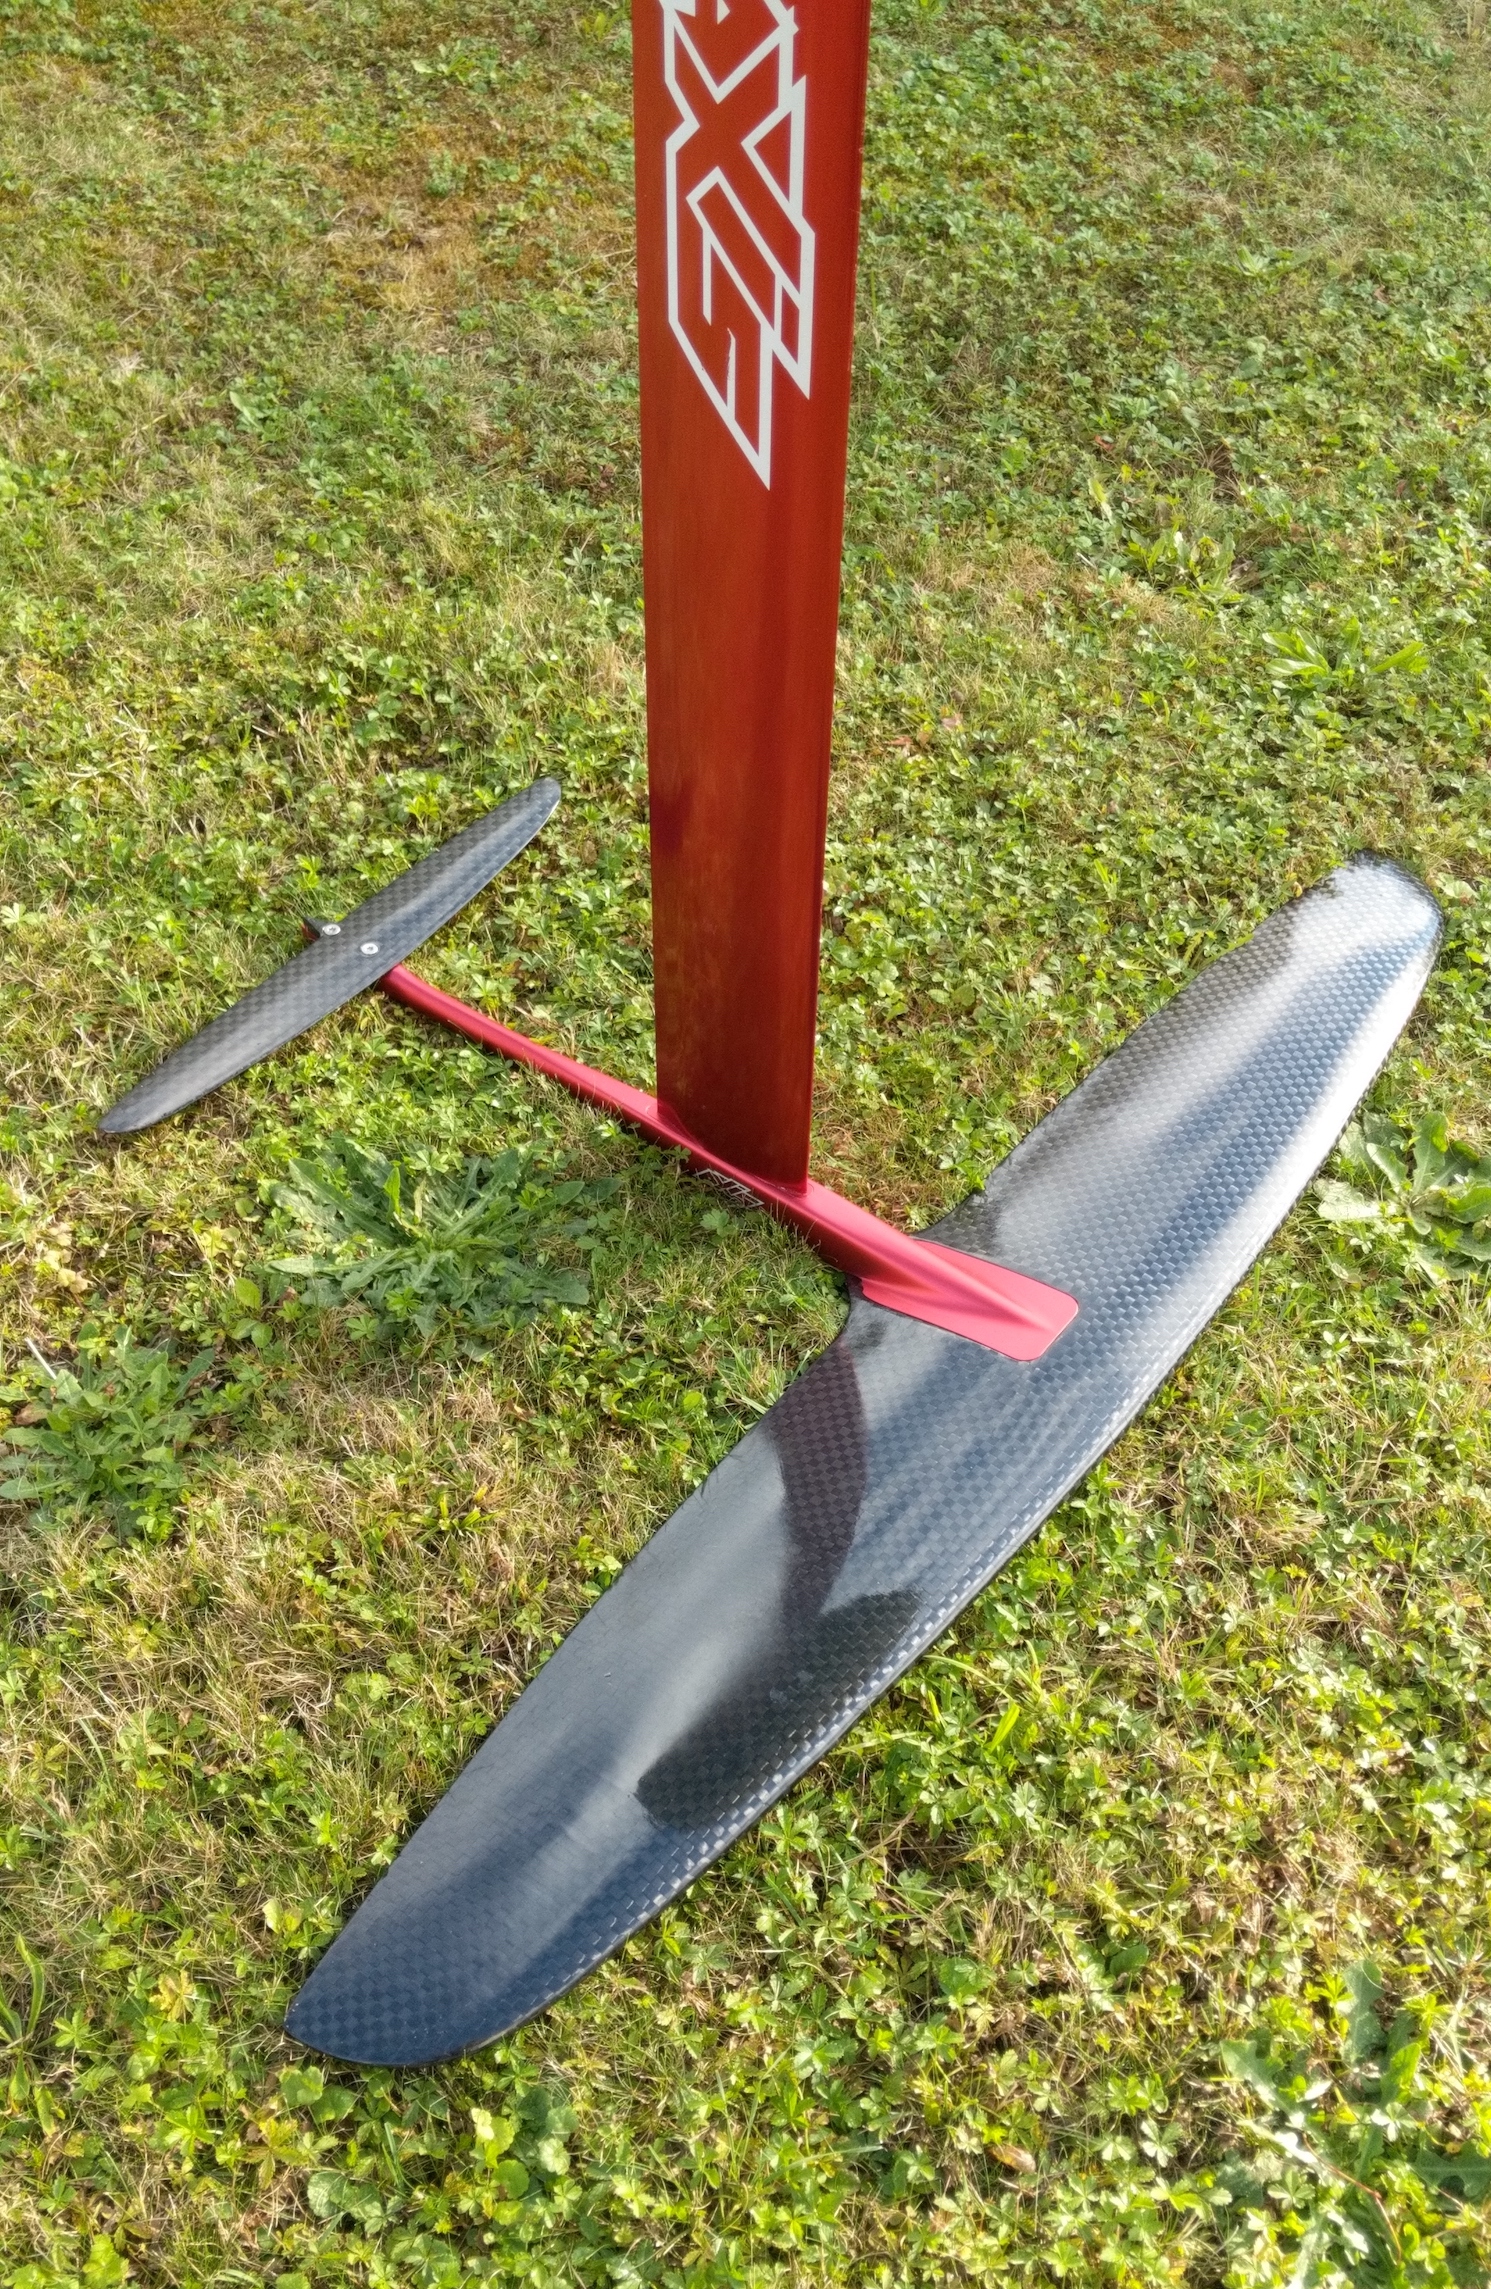 Full wing set (Axis 1150 front wing and Axis 460 back wing.